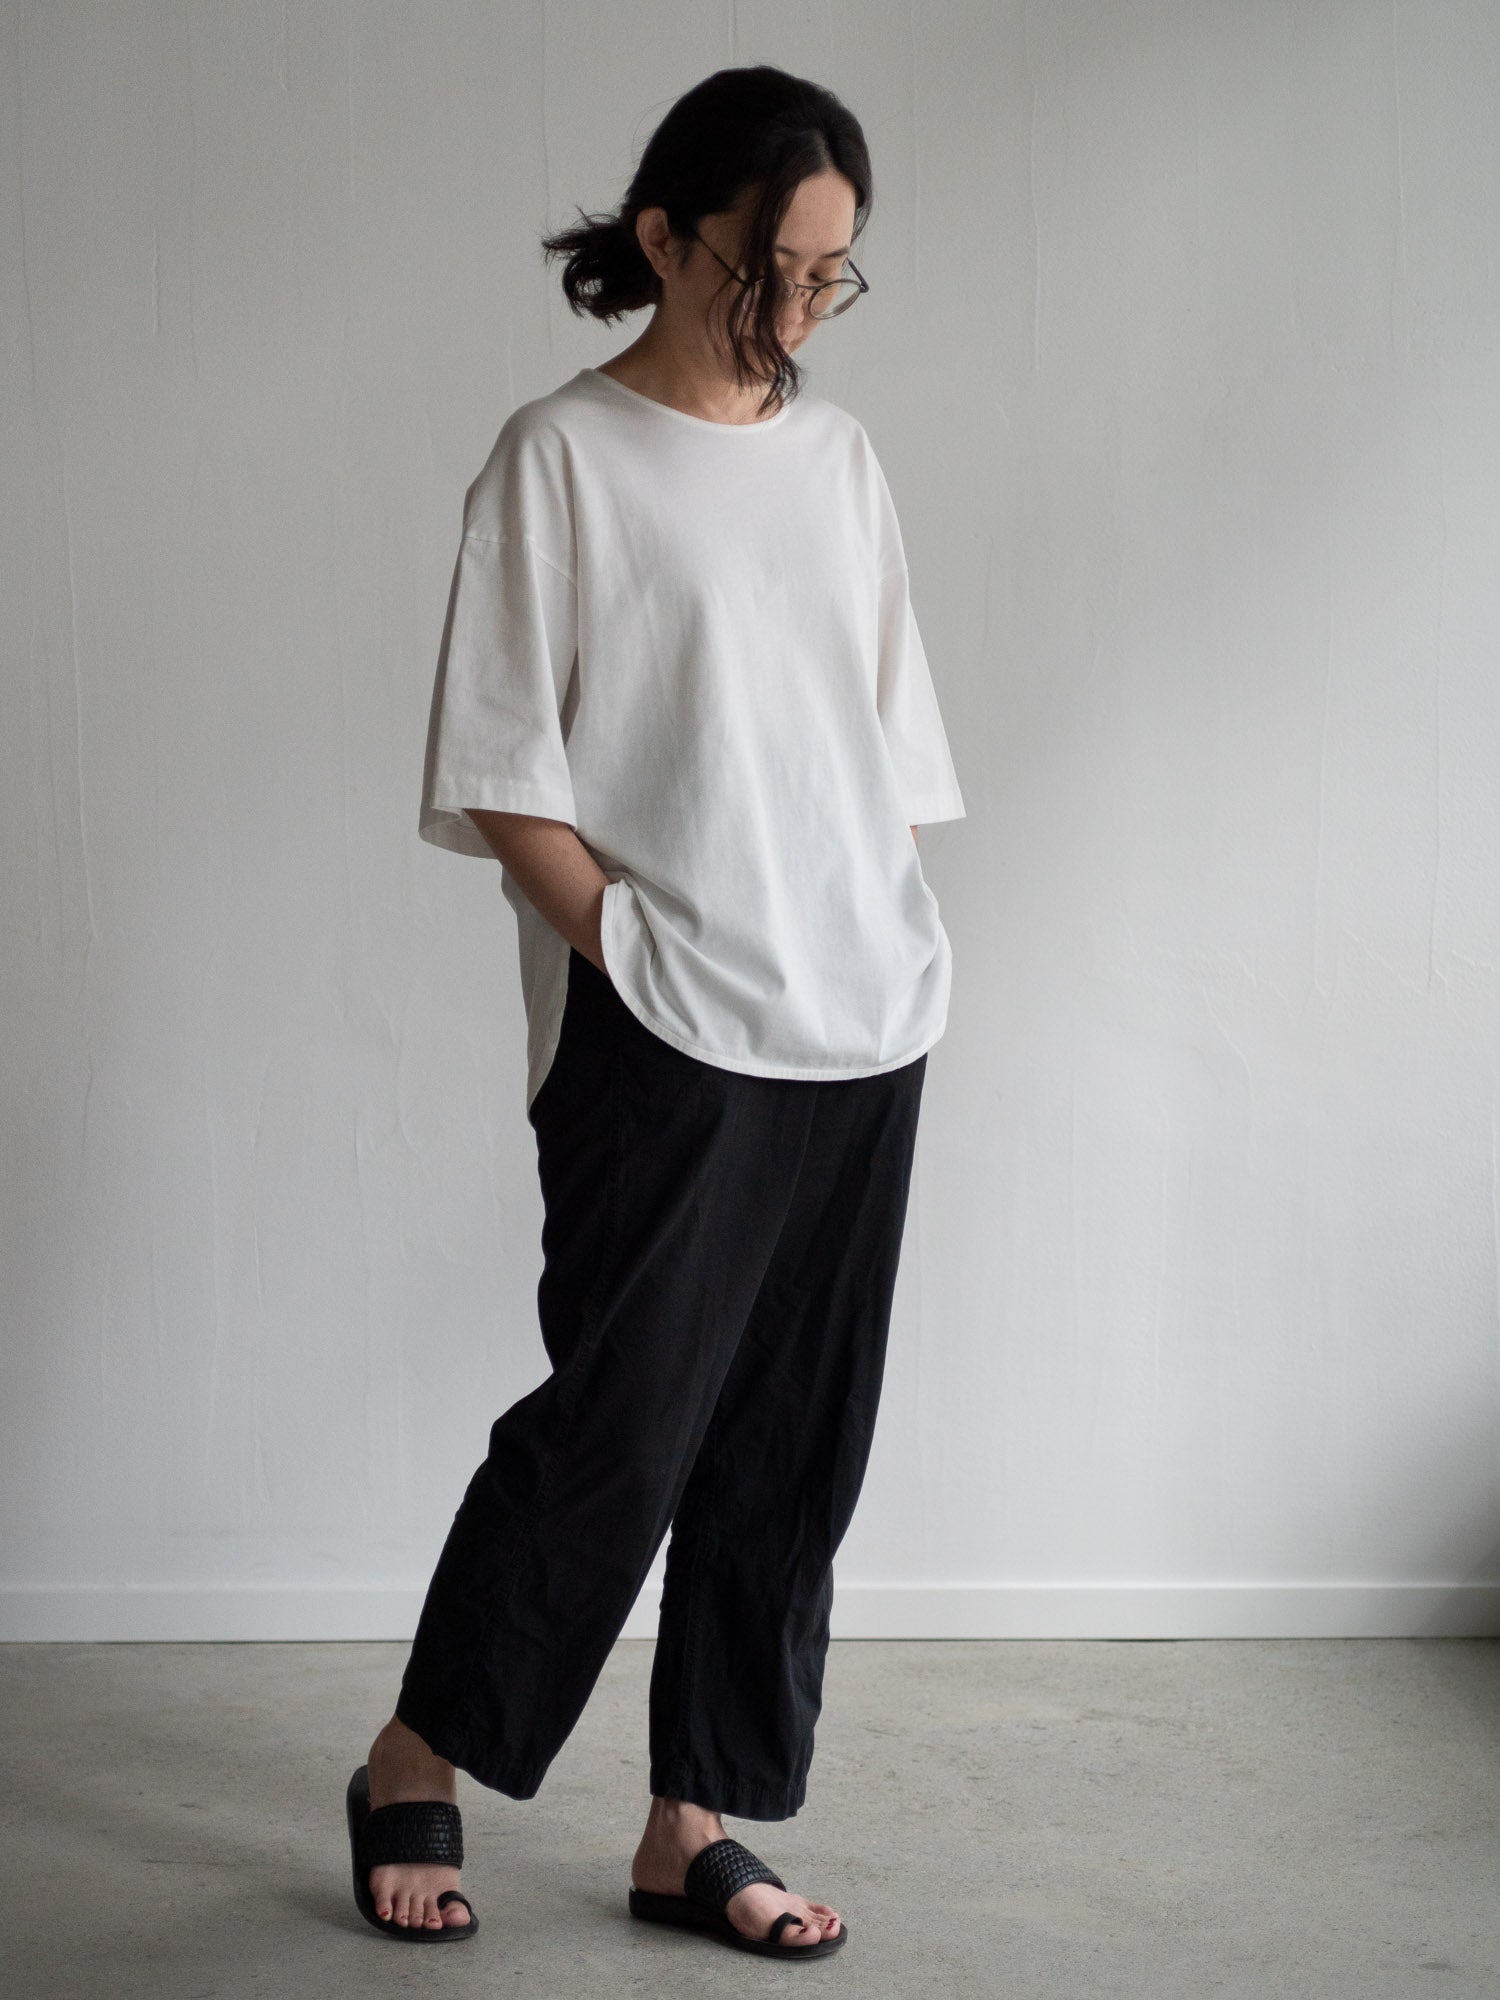 Classic Linen Wool Wrapped Pants - Black